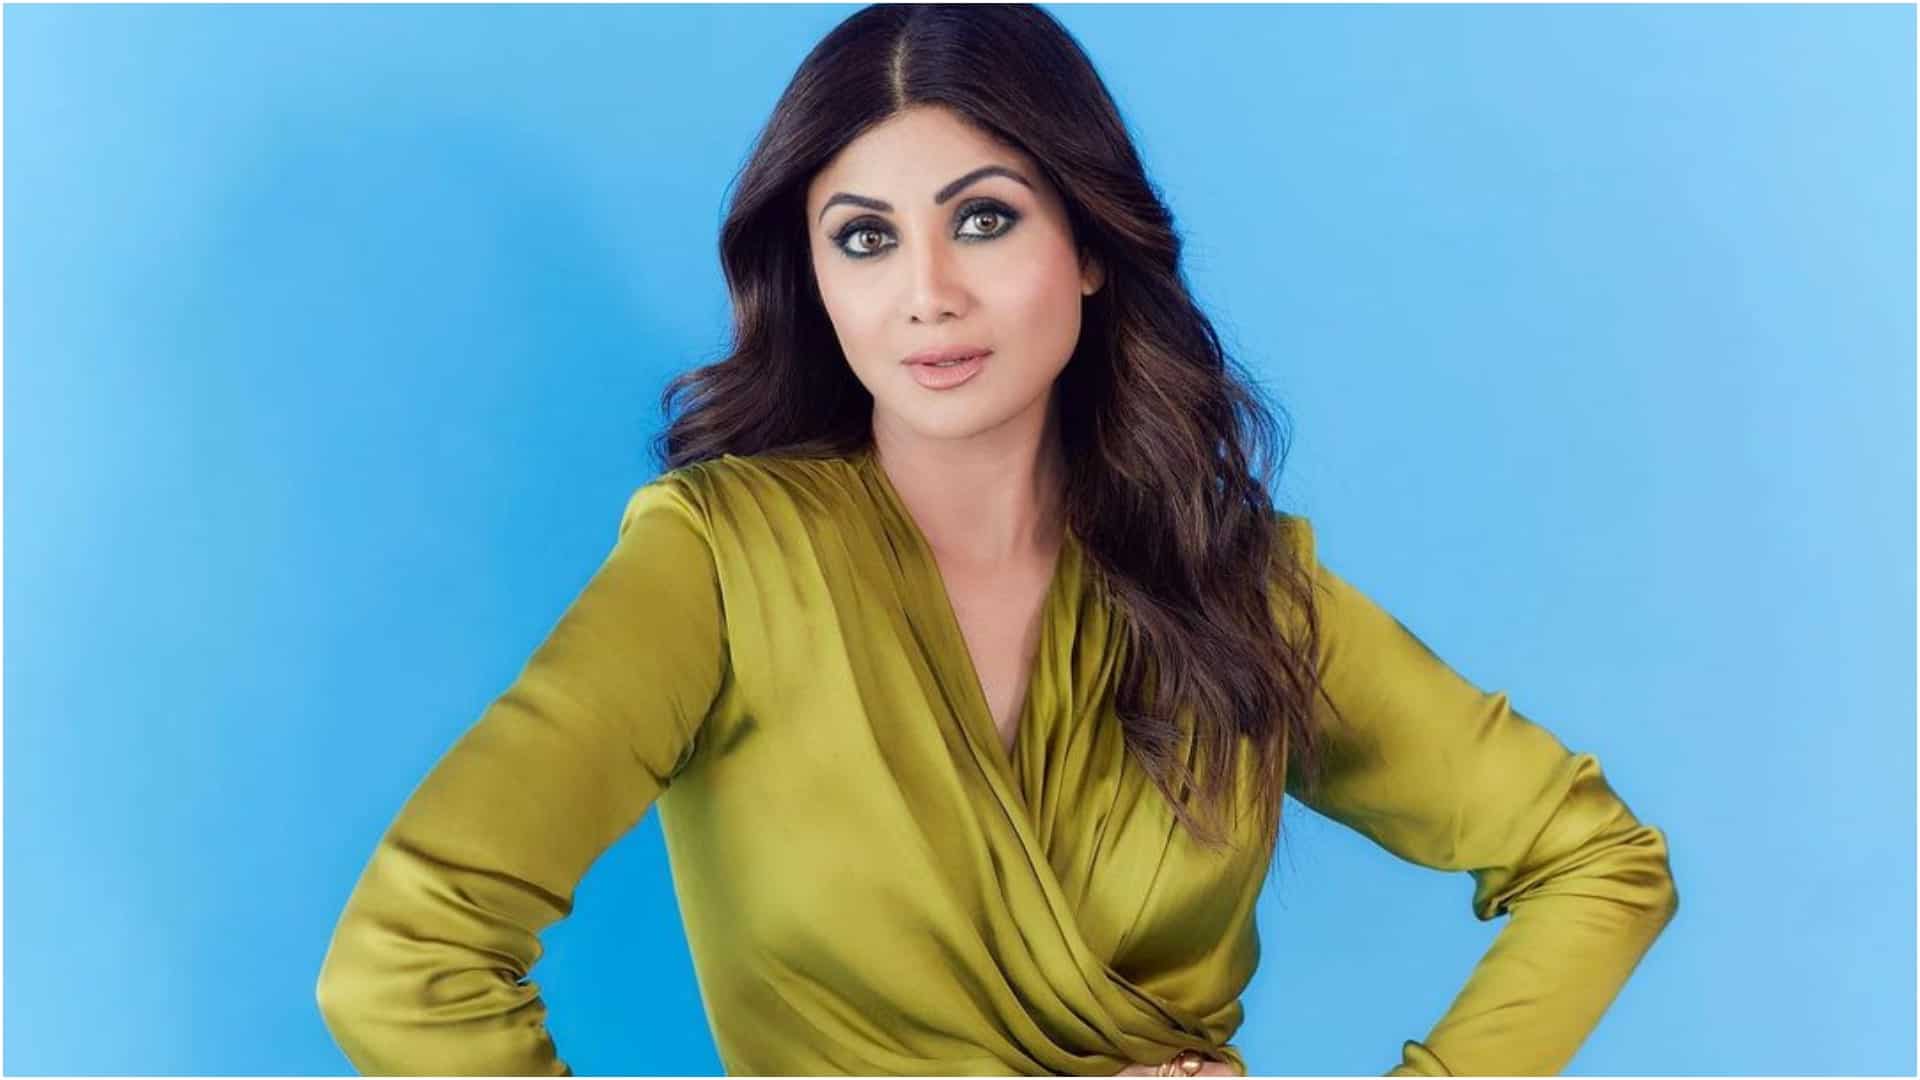 https://www.mobilemasala.com/film-gossip/Shilpa-Shetty-Kundra-meets-Salman-Khan-amid-ED-heat-her-mom-joins-in-days-after-attack-at-Galaxy-Apartments-i255373